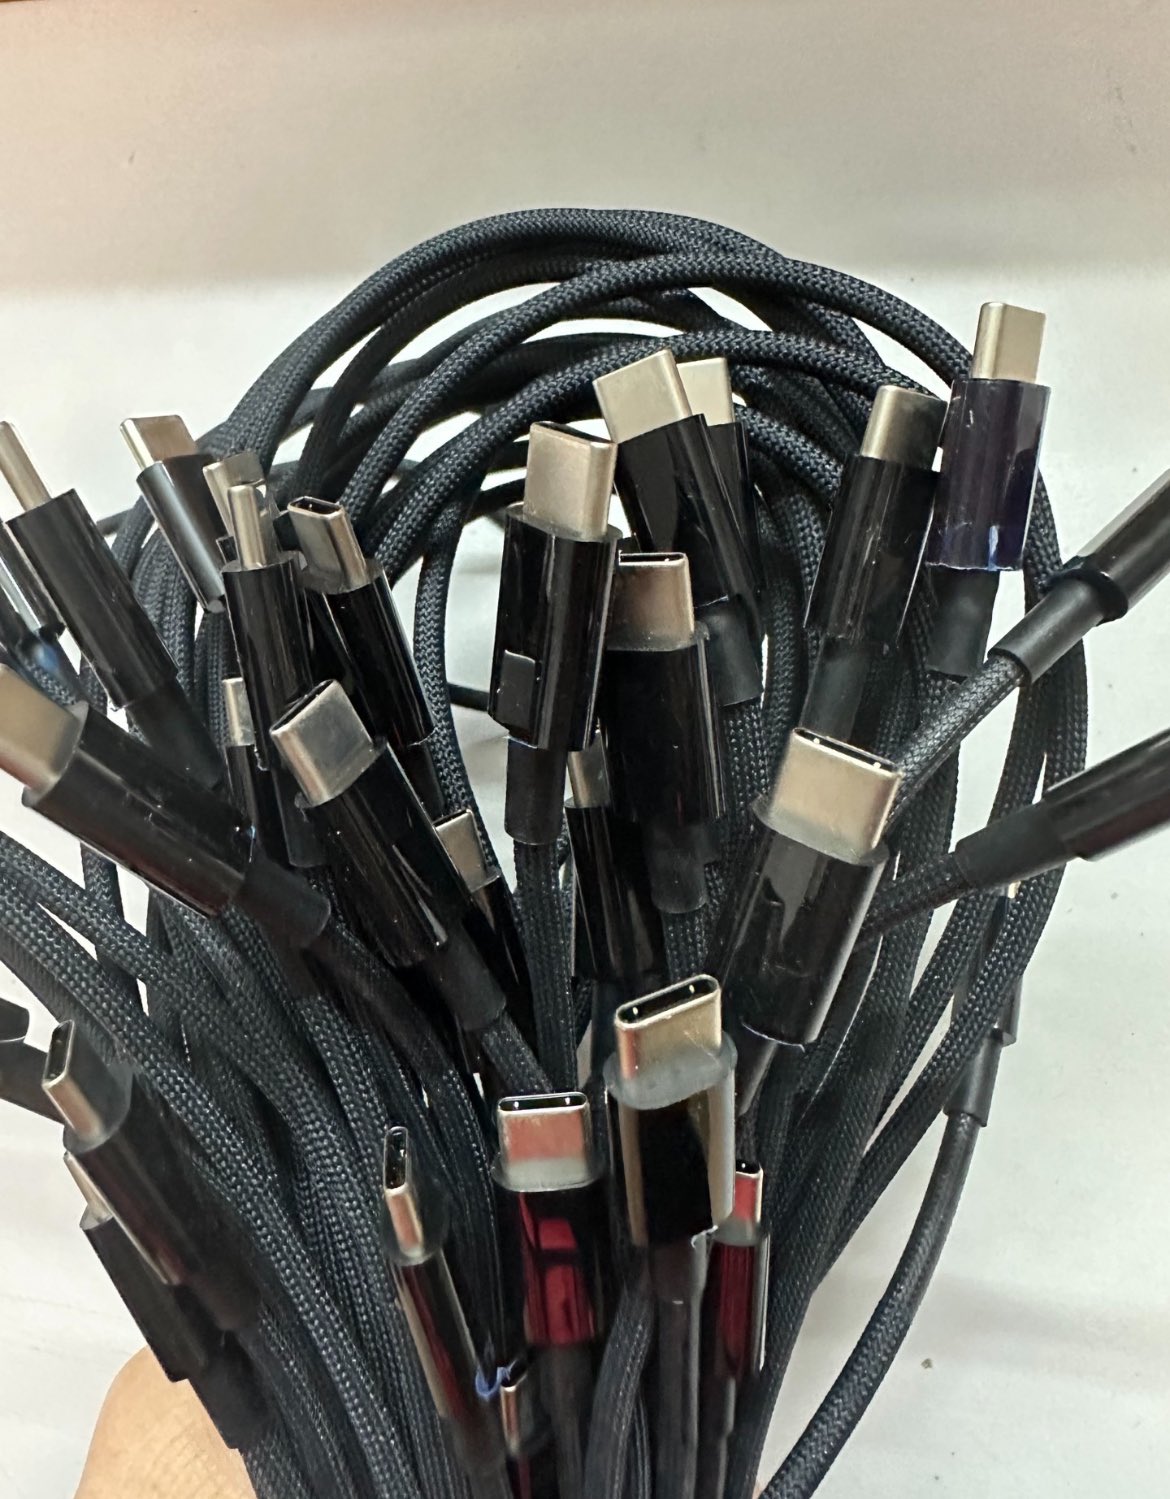 Apple's traditional TPE material cables